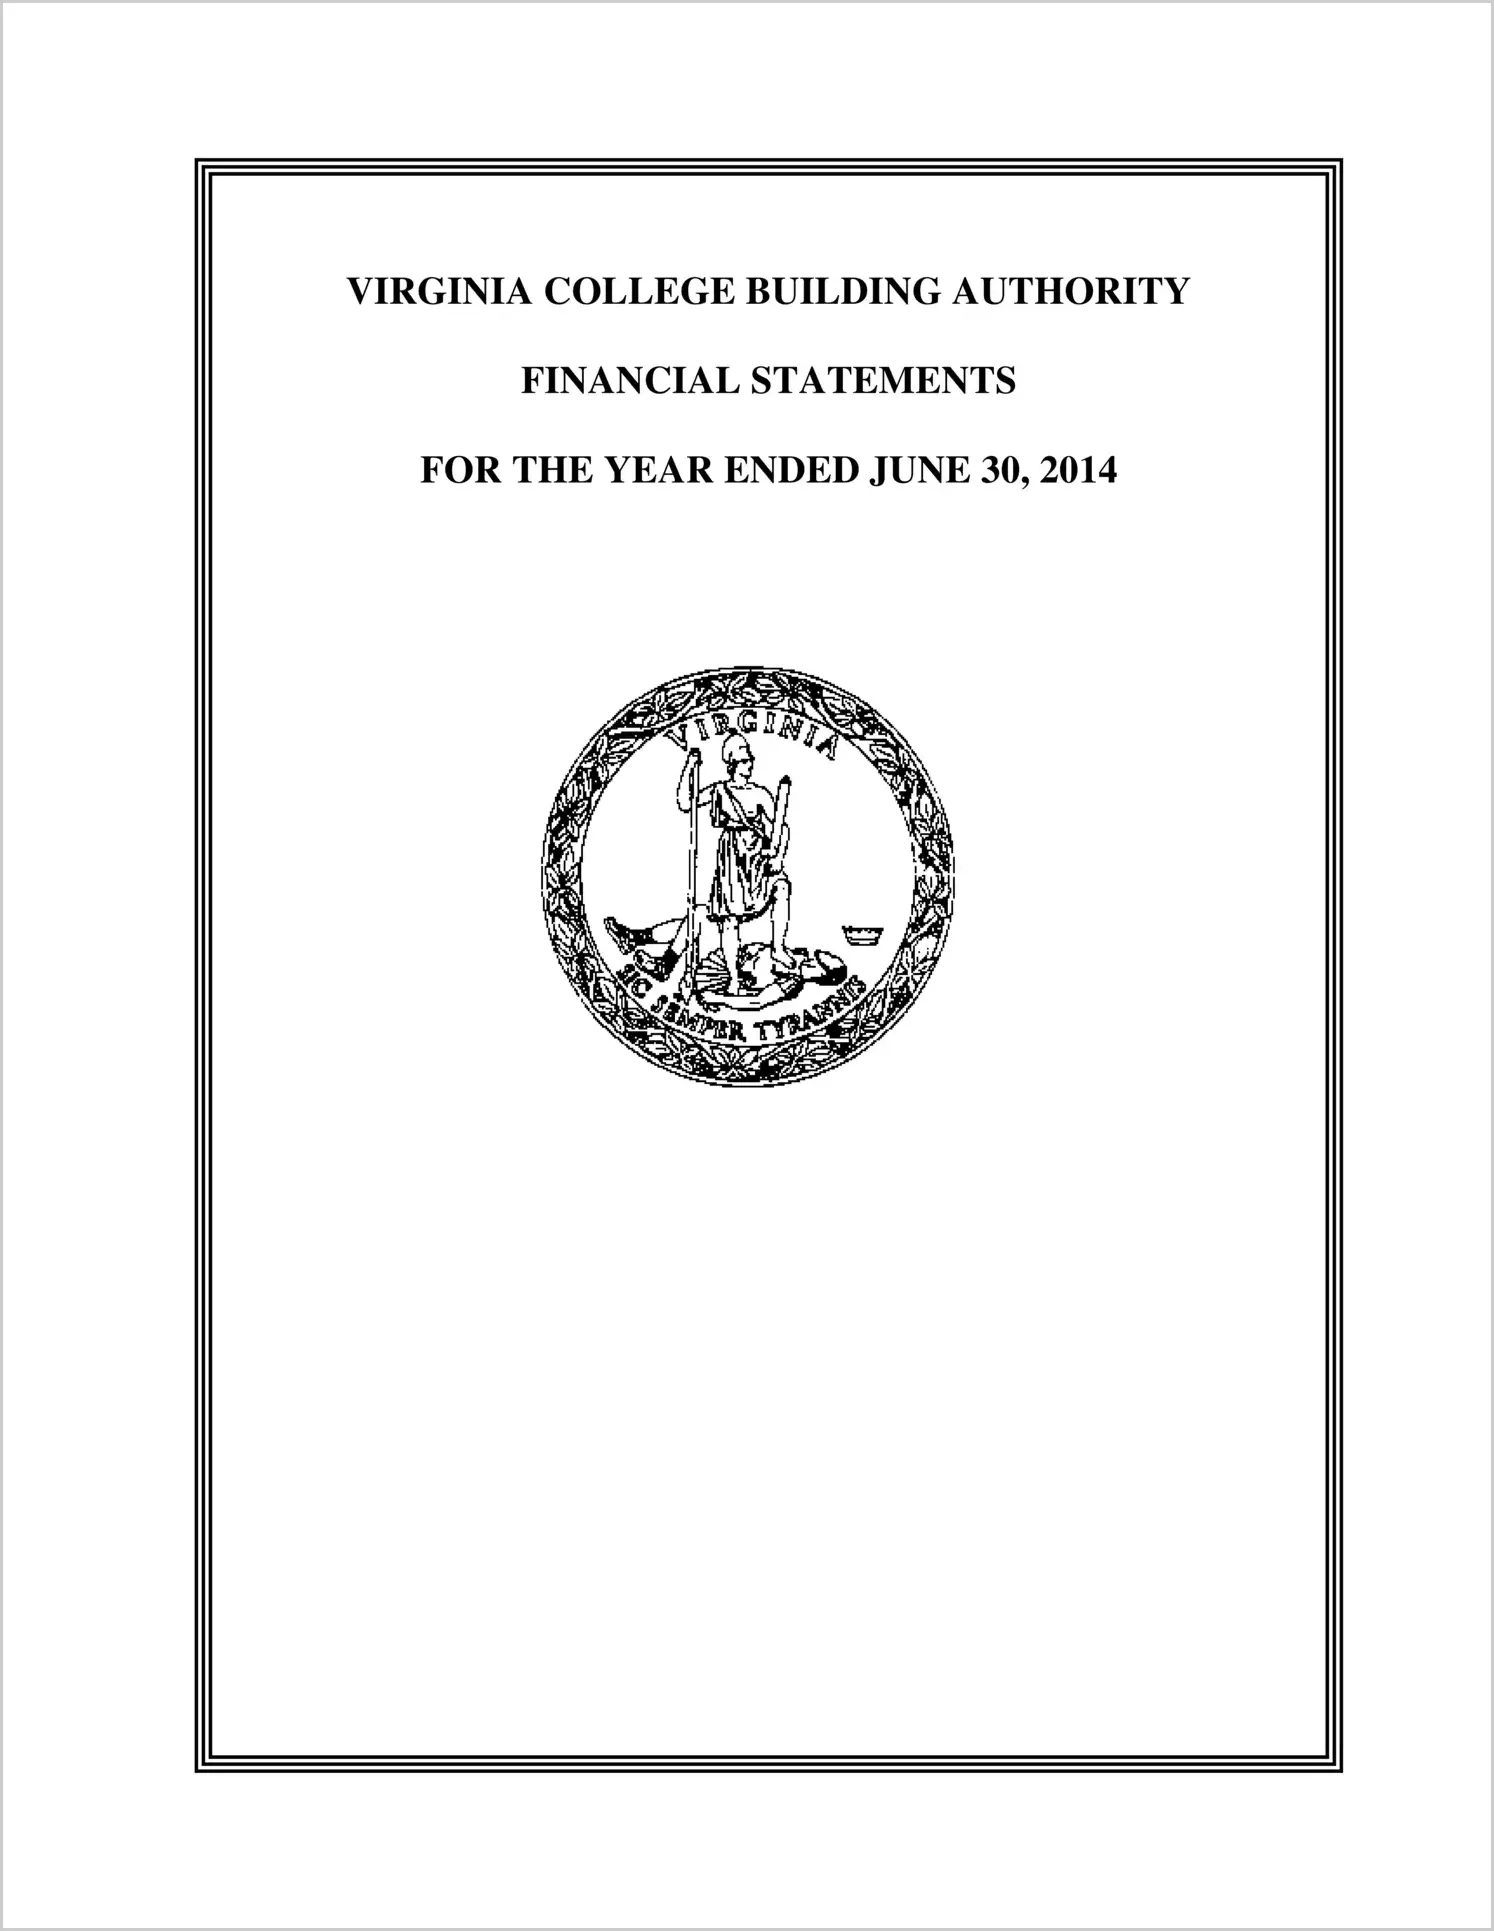 Virginia College Building Authority Financial Statements for the year ended June 30, 2014